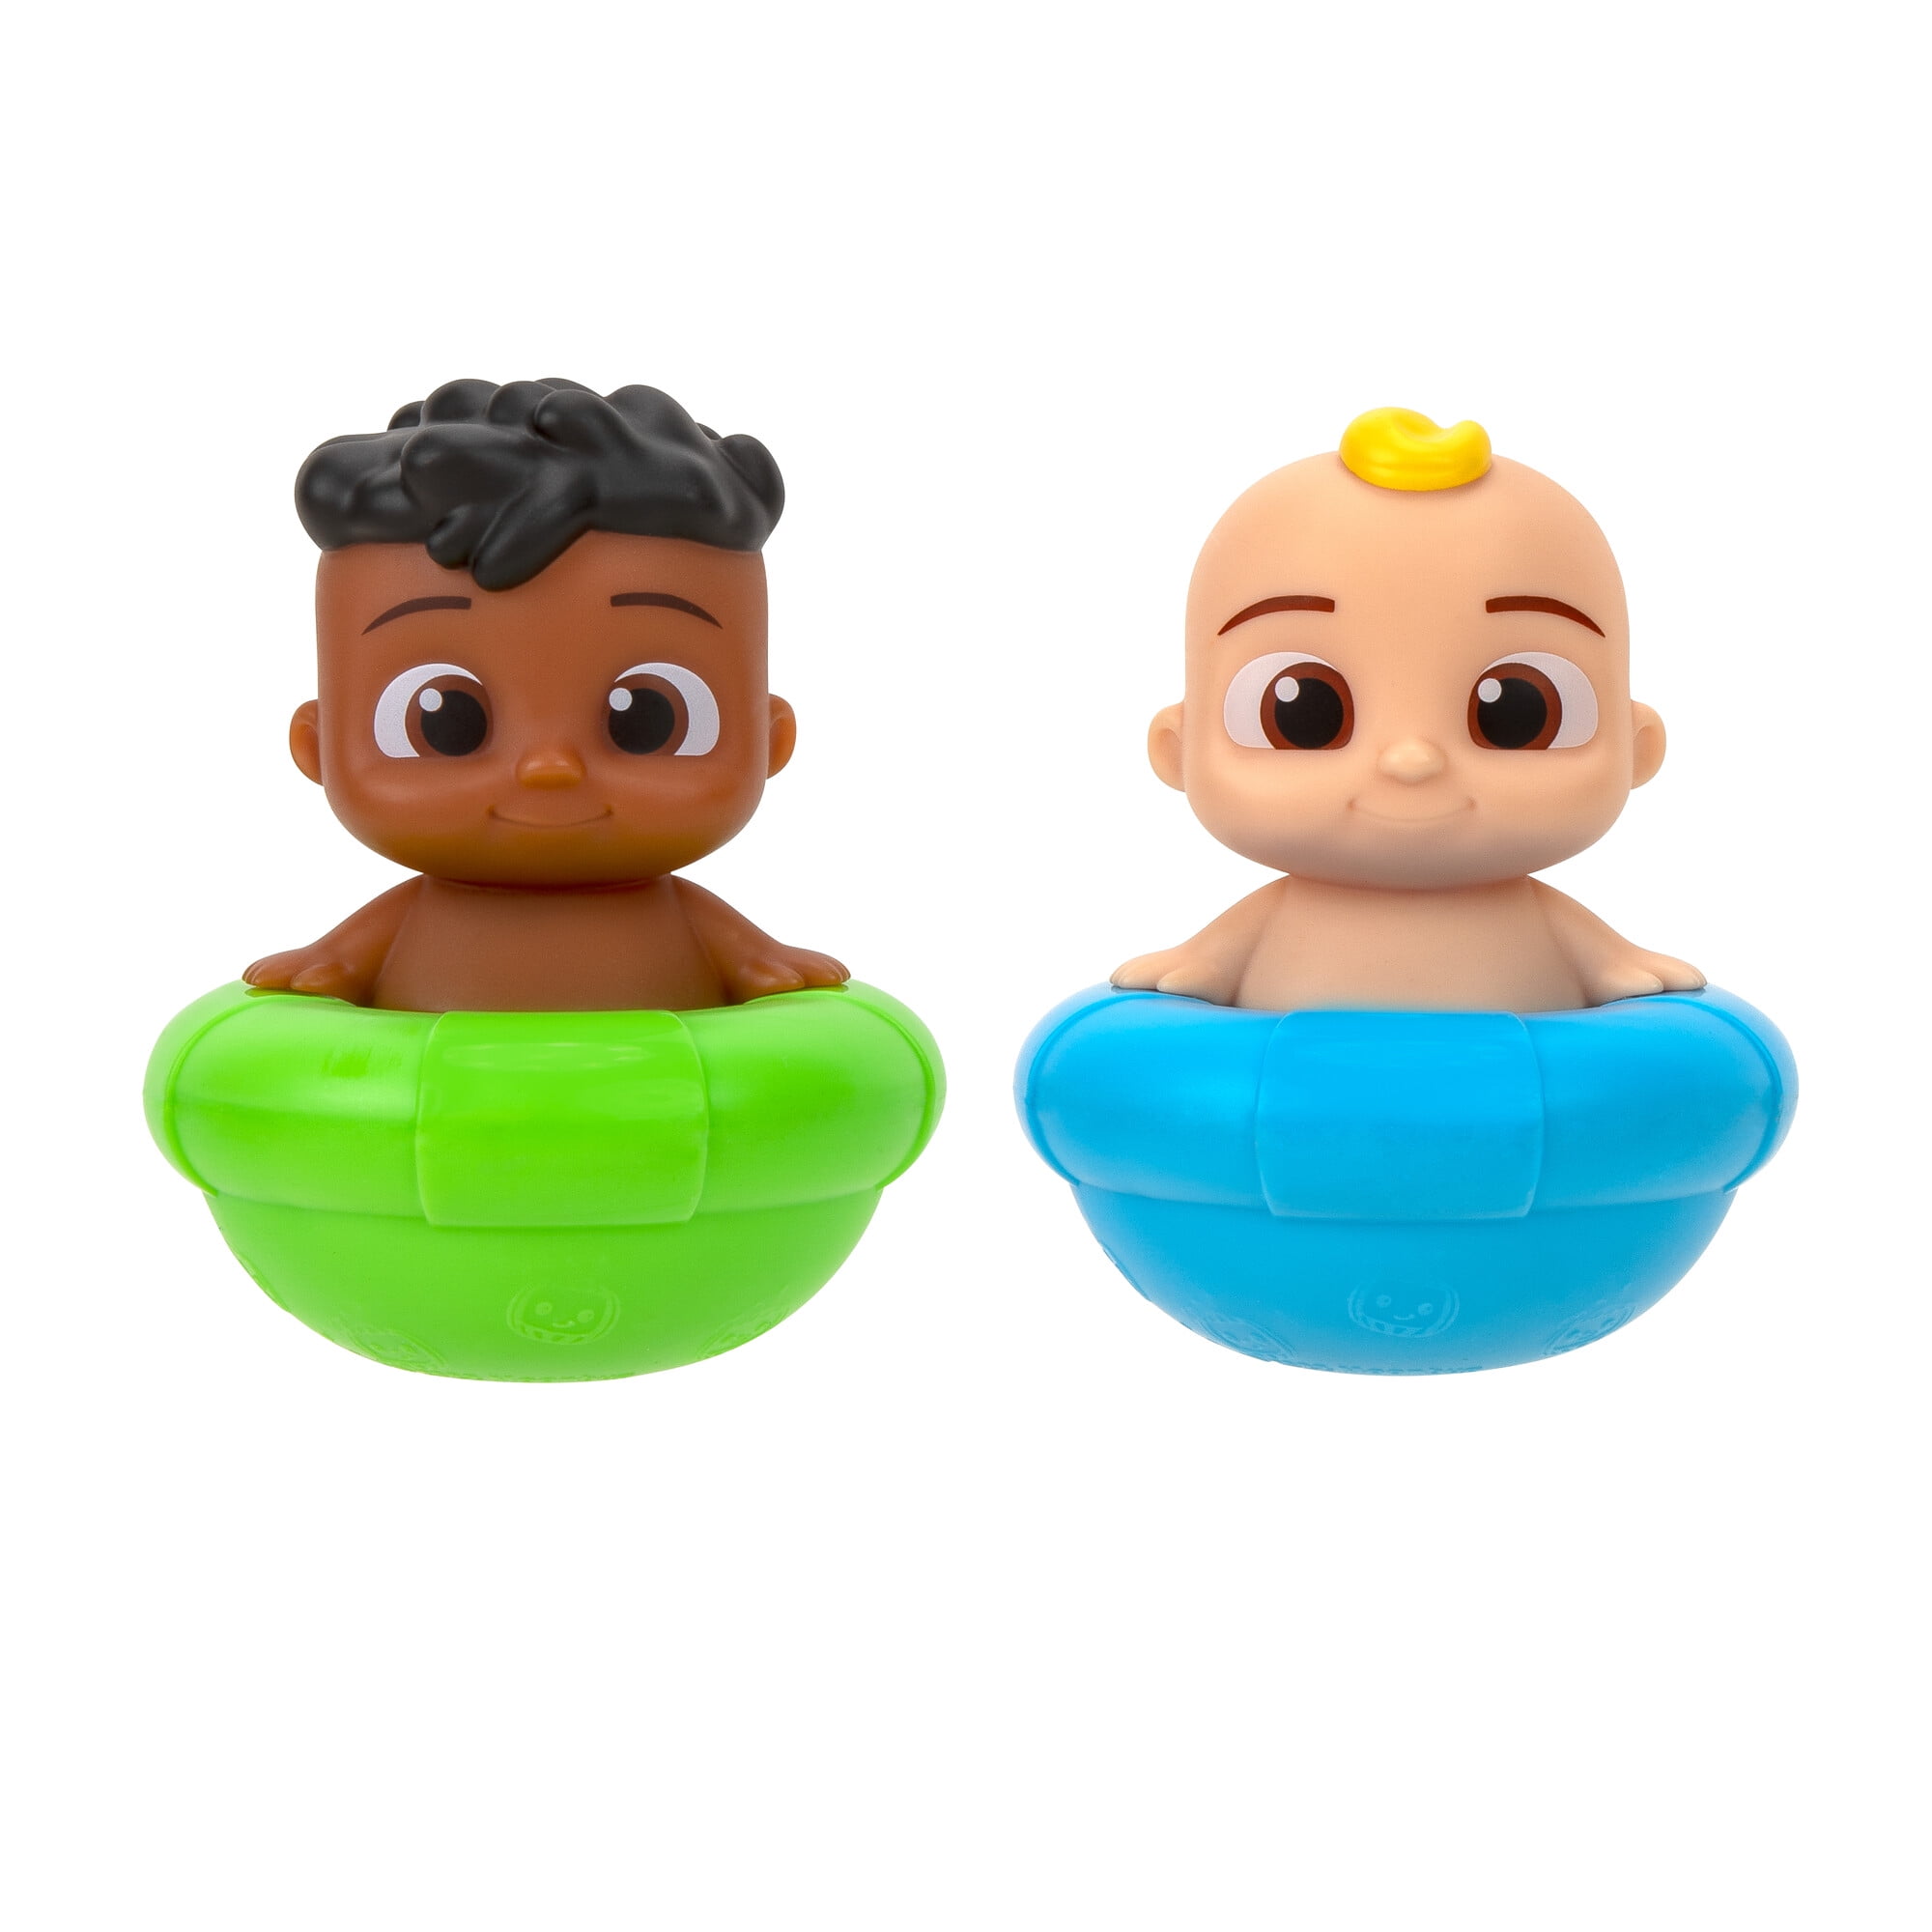 CoComelon Bath & Pool Toys, 2 Piece Set - JJ & Cody Floating Bobble Figures - Water Toys for Toddlers & Kids - Ages 18+ Months